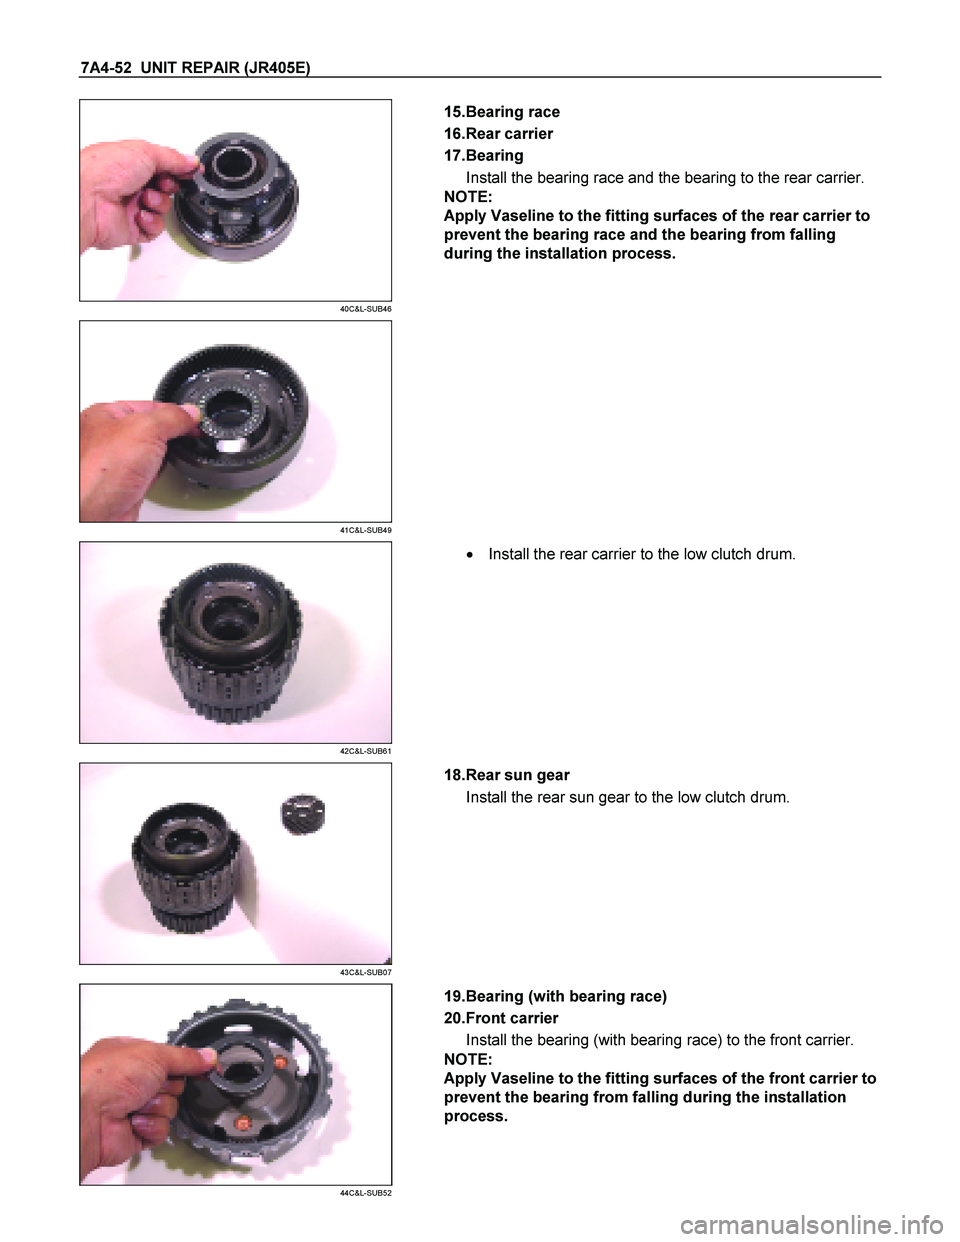 ISUZU TF SERIES 2004  Workshop Manual 7A4-52  UNIT REPAIR (JR405E) 
 
40C&L-SUB46 
  
   15.Bearing race  
16.Rear carrier 
17.Bearing  Install the bearing race and the bearing to the rear carrier.  
NOTE:  
Apply Vaseline to the fitting 